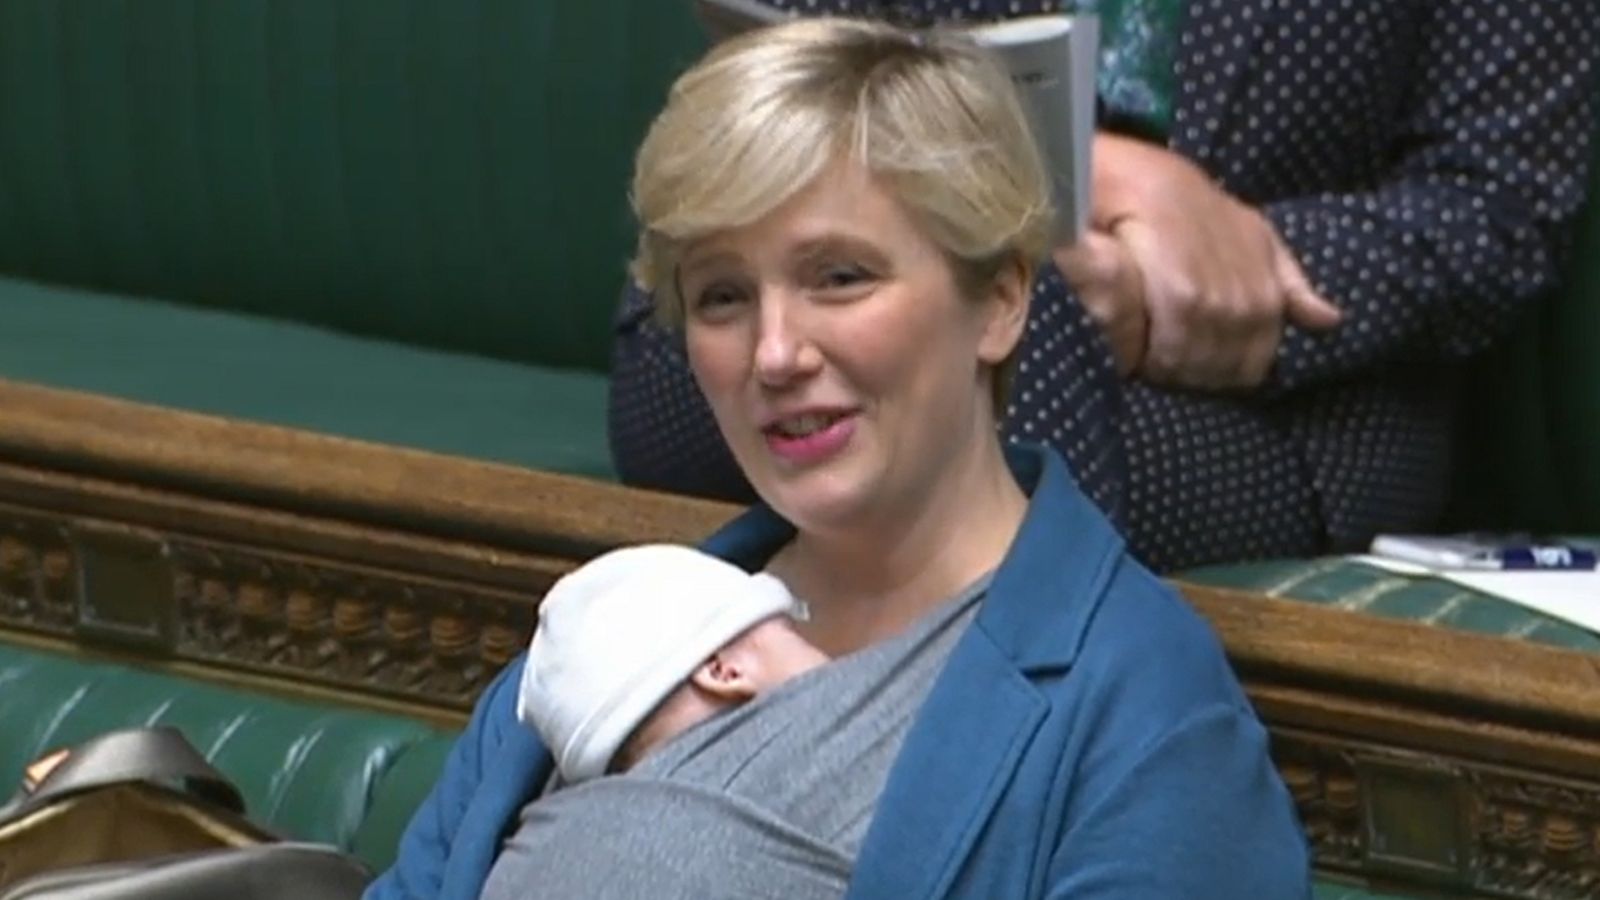 Labour MP Stella Creasy criticises parliamentary rules after reminder over taking baby to debate